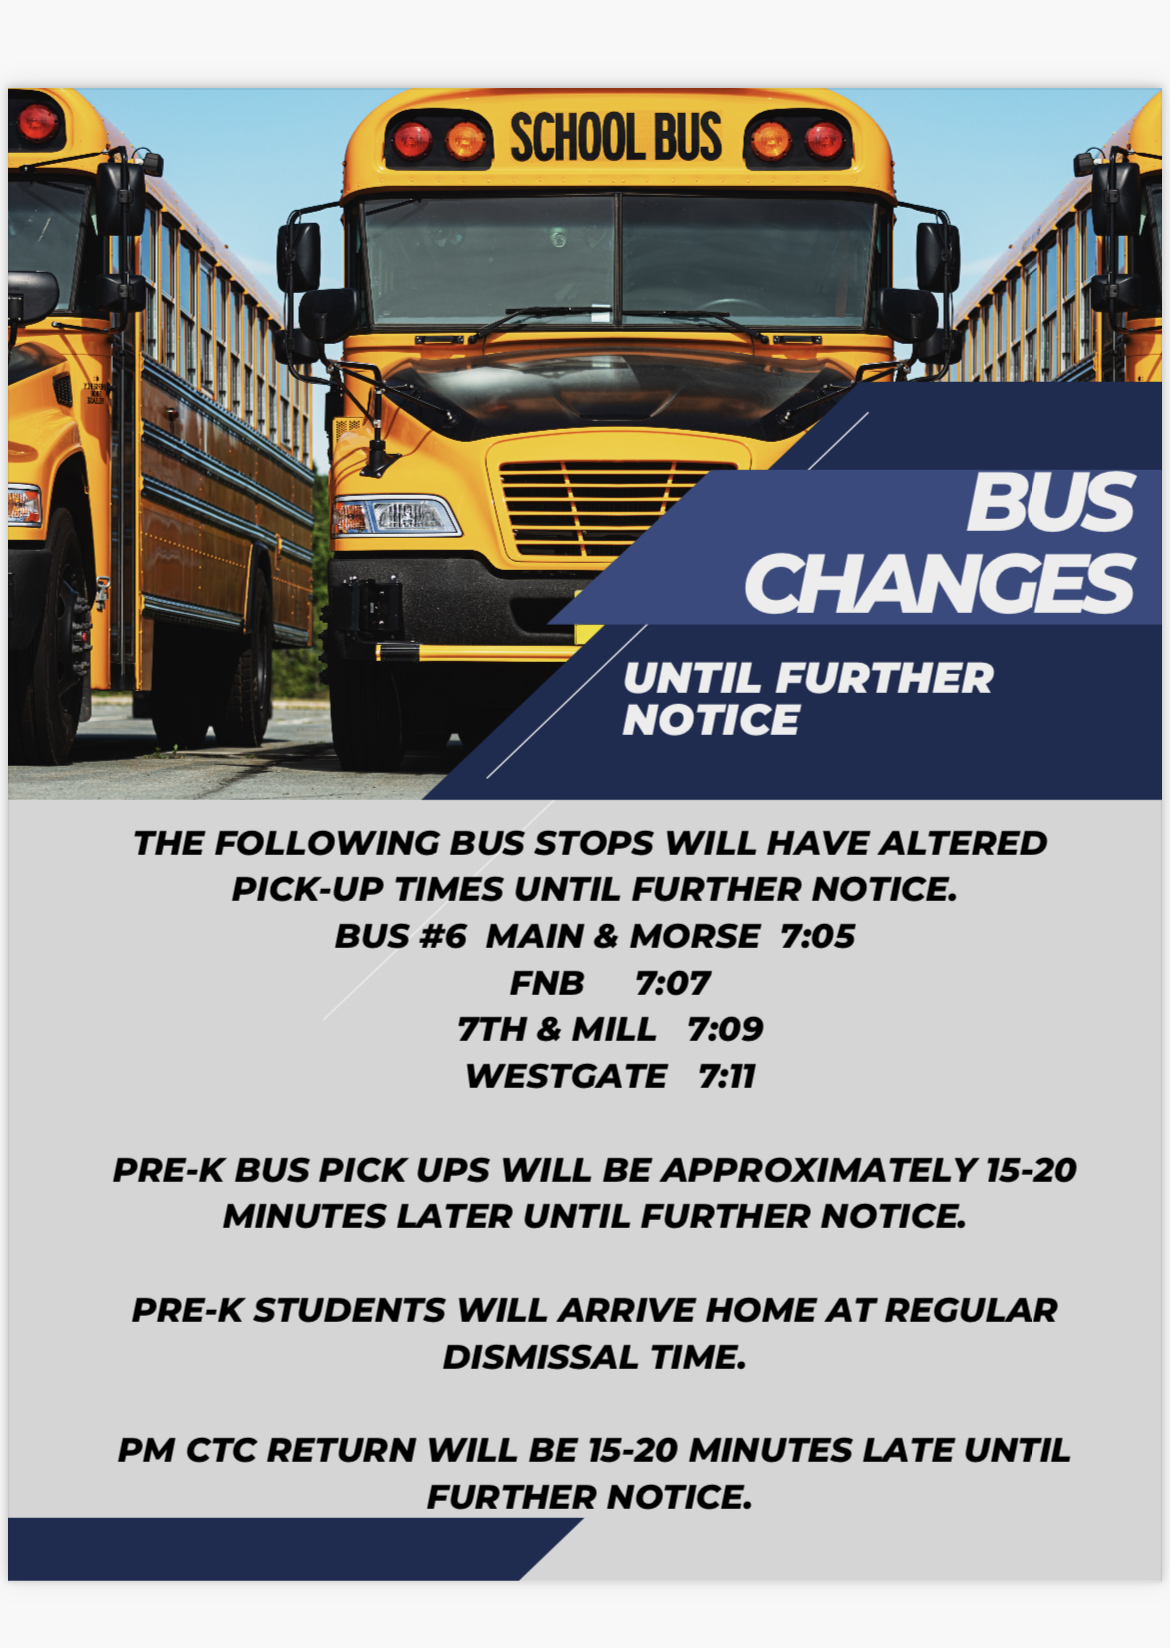 Bus Changes Until Further Notice